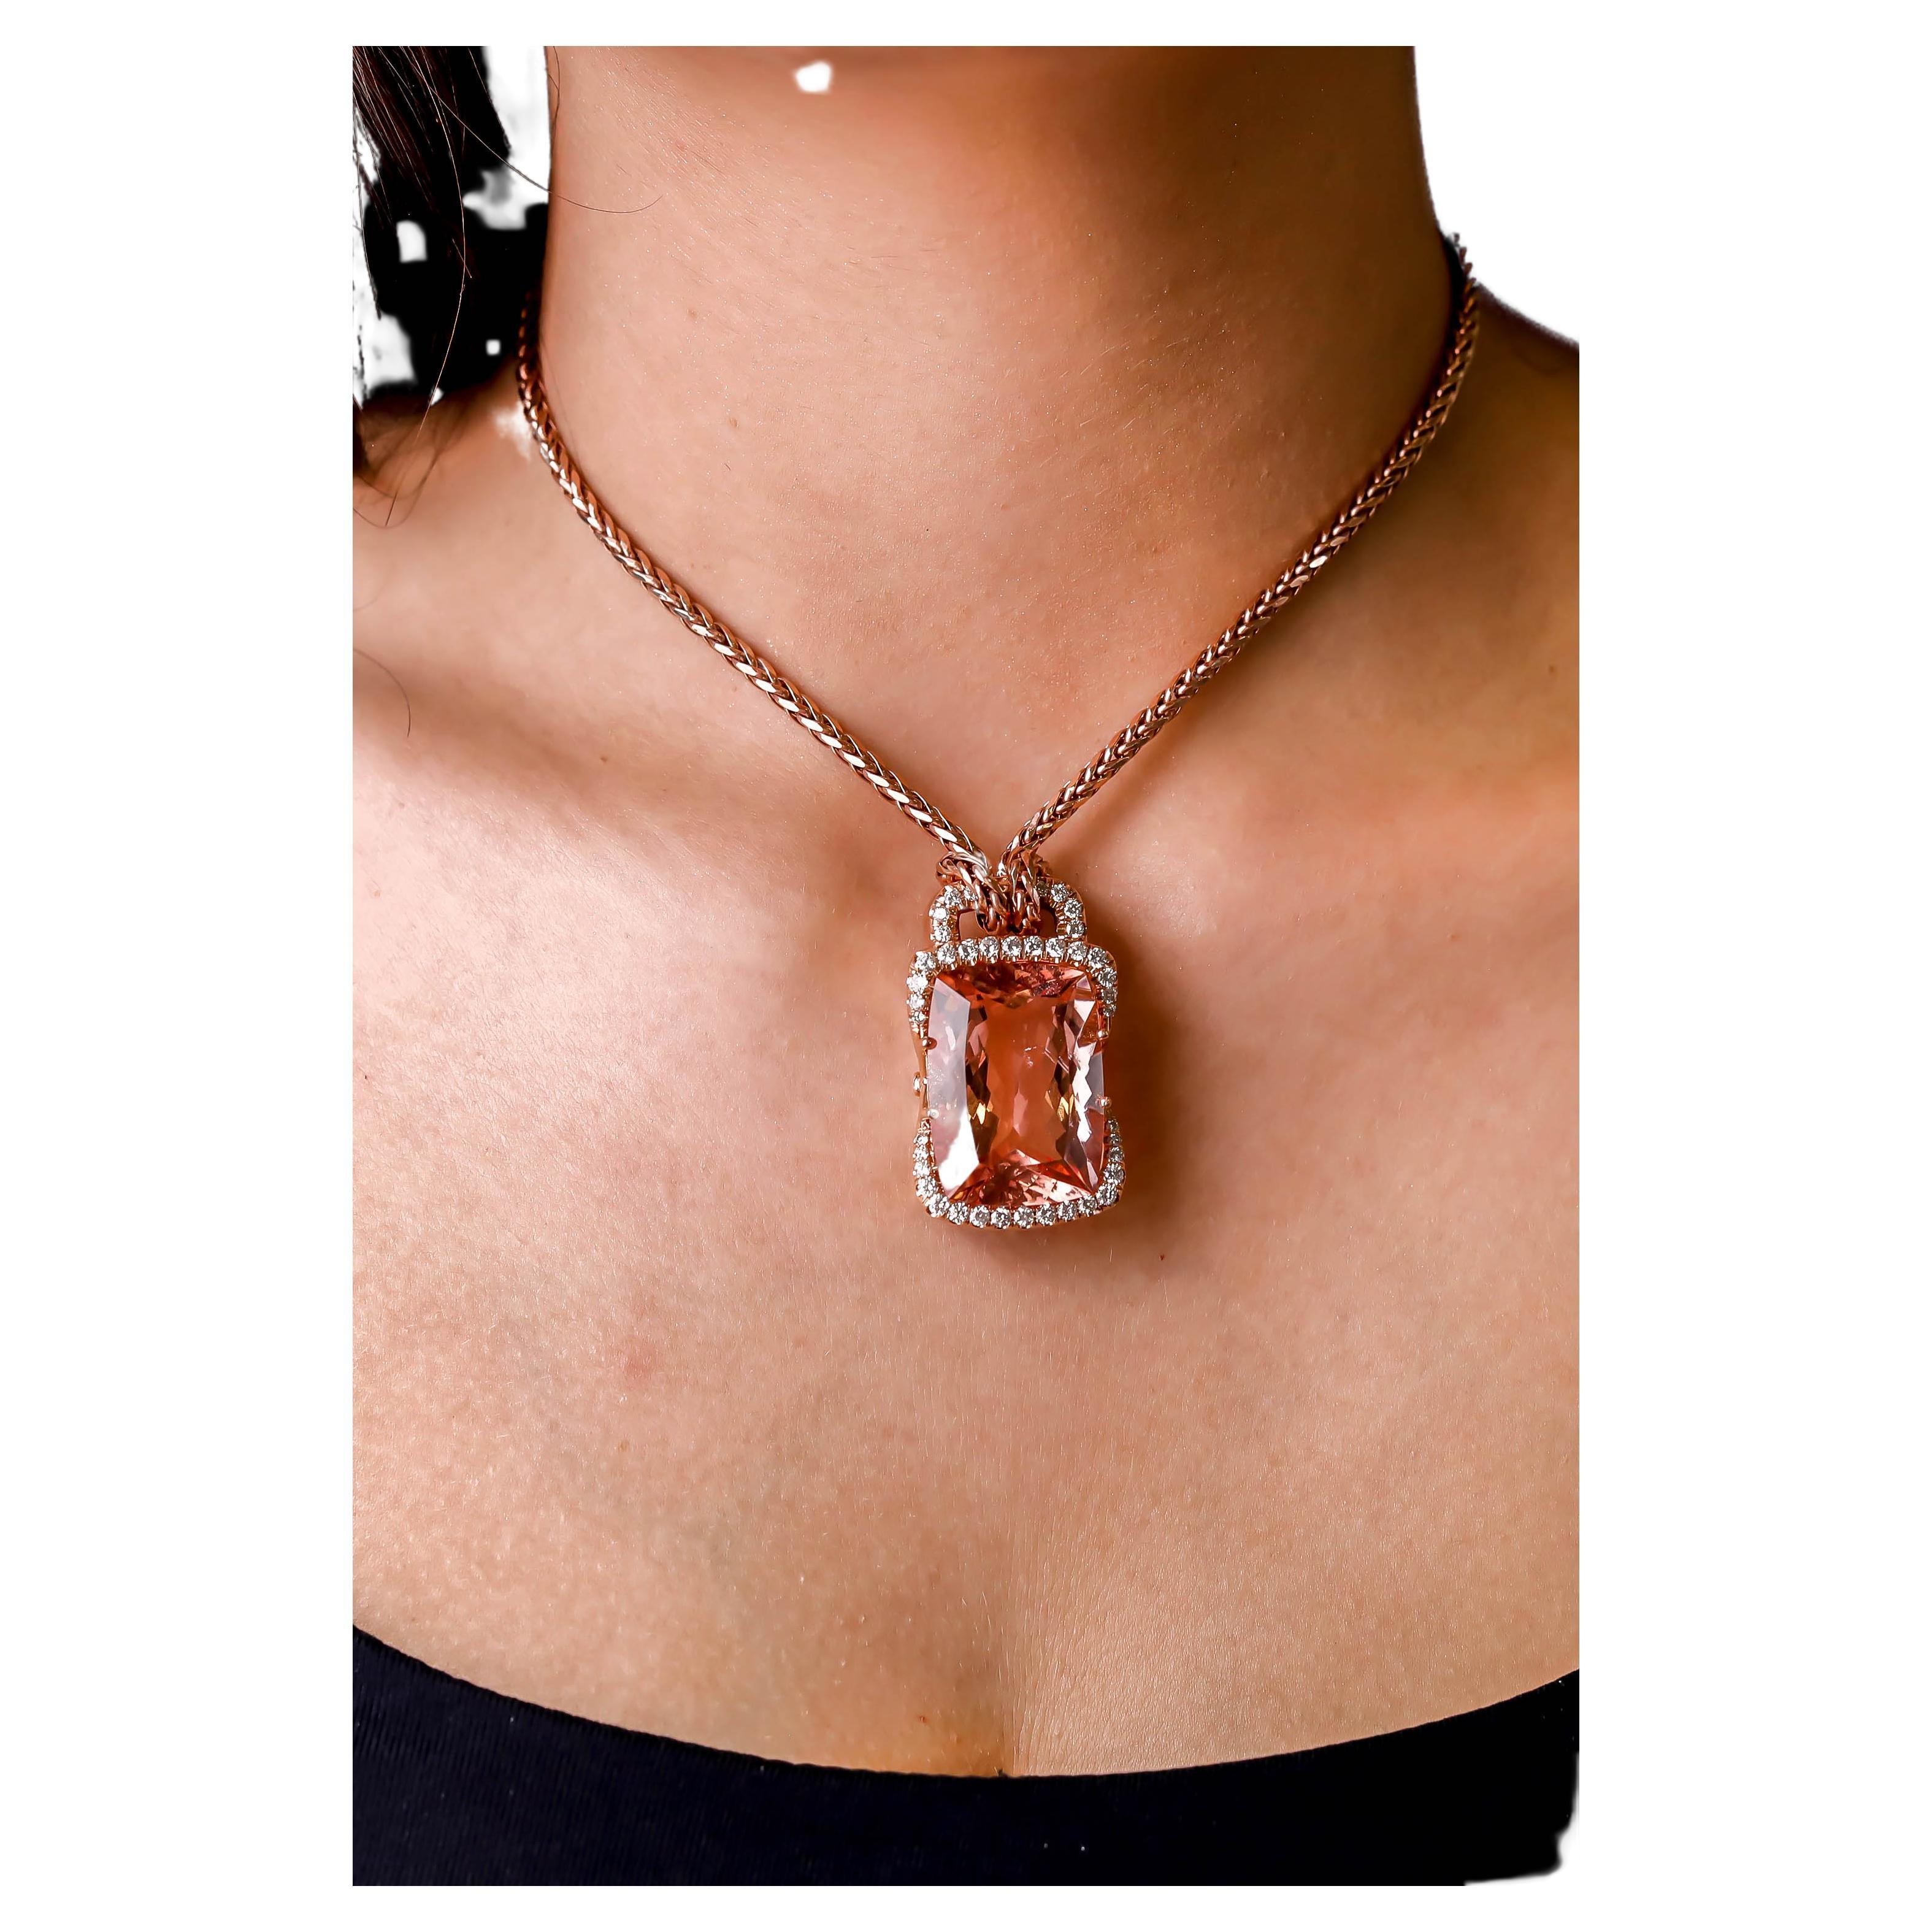  36.5-CT Radiant-Cut Morganite & Diamond Solitaire Pendant in 14K Rose Gold

Style and Glamour in one shot! this pendant showcases trilliant cut pink morganite Gemstone that will intrigue you with its glamorous look. Accented with 2.1 TCW of